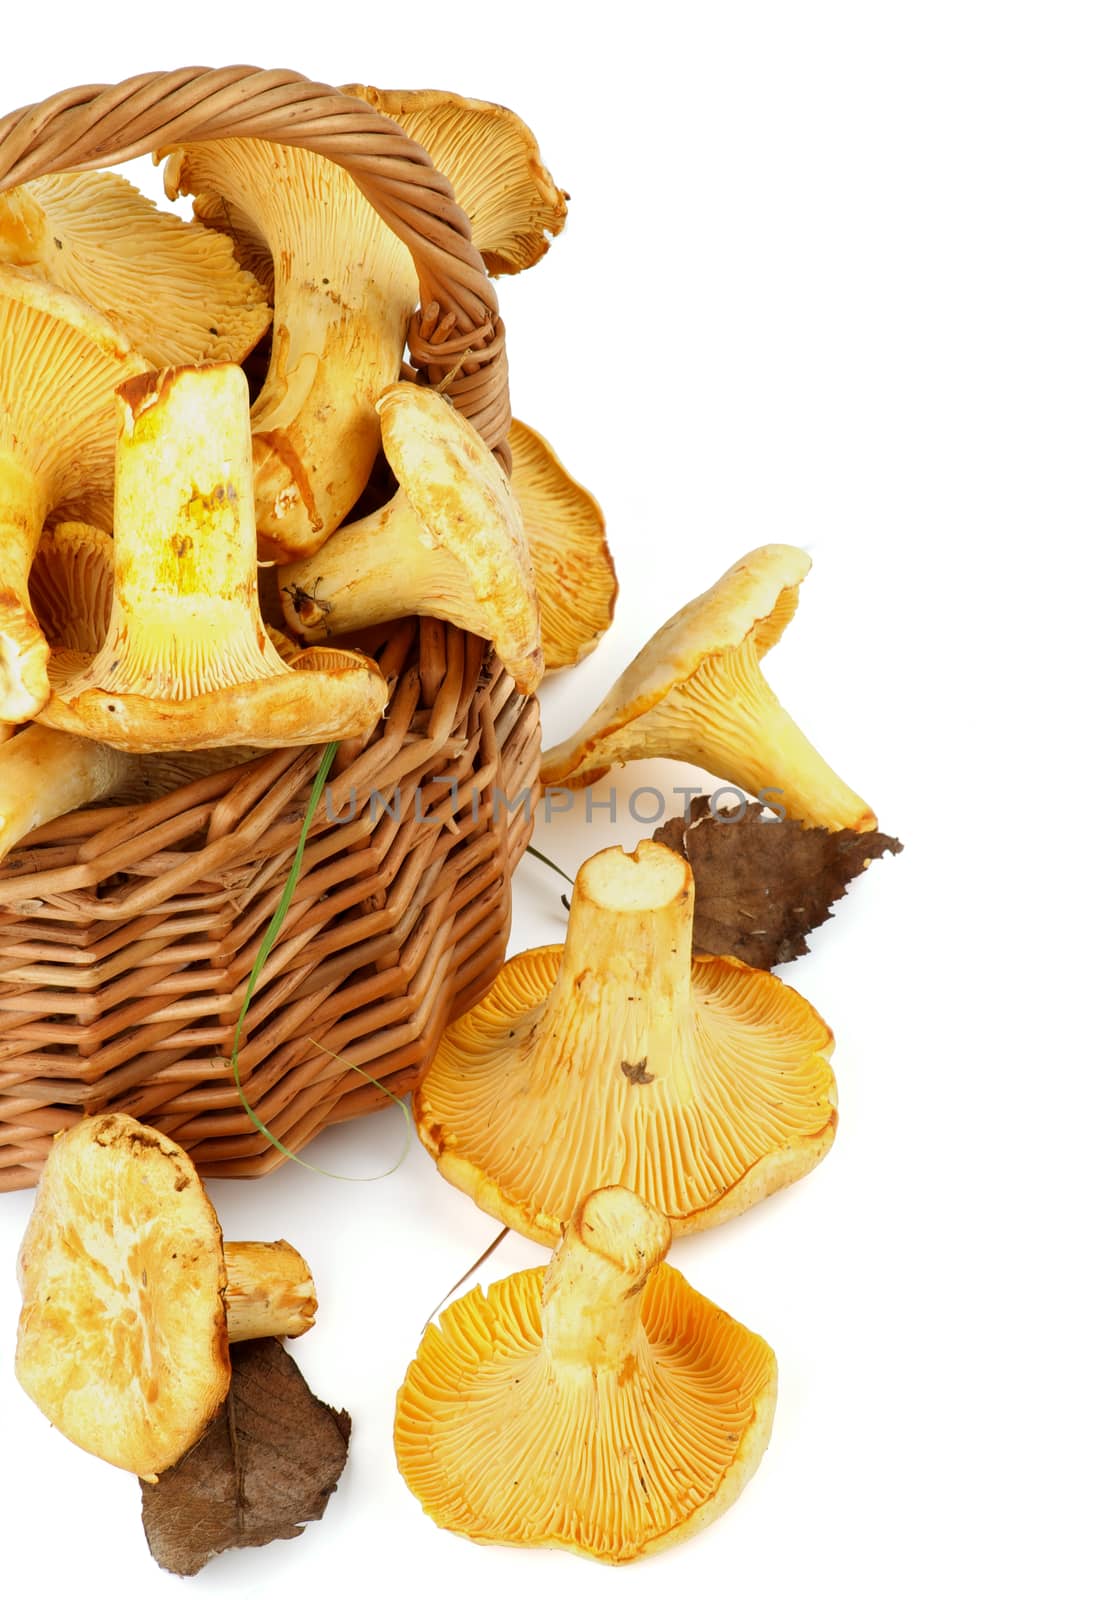 Perfect Raw Chanterelles with Dry Leafs in Wicker Basket closeup on White background